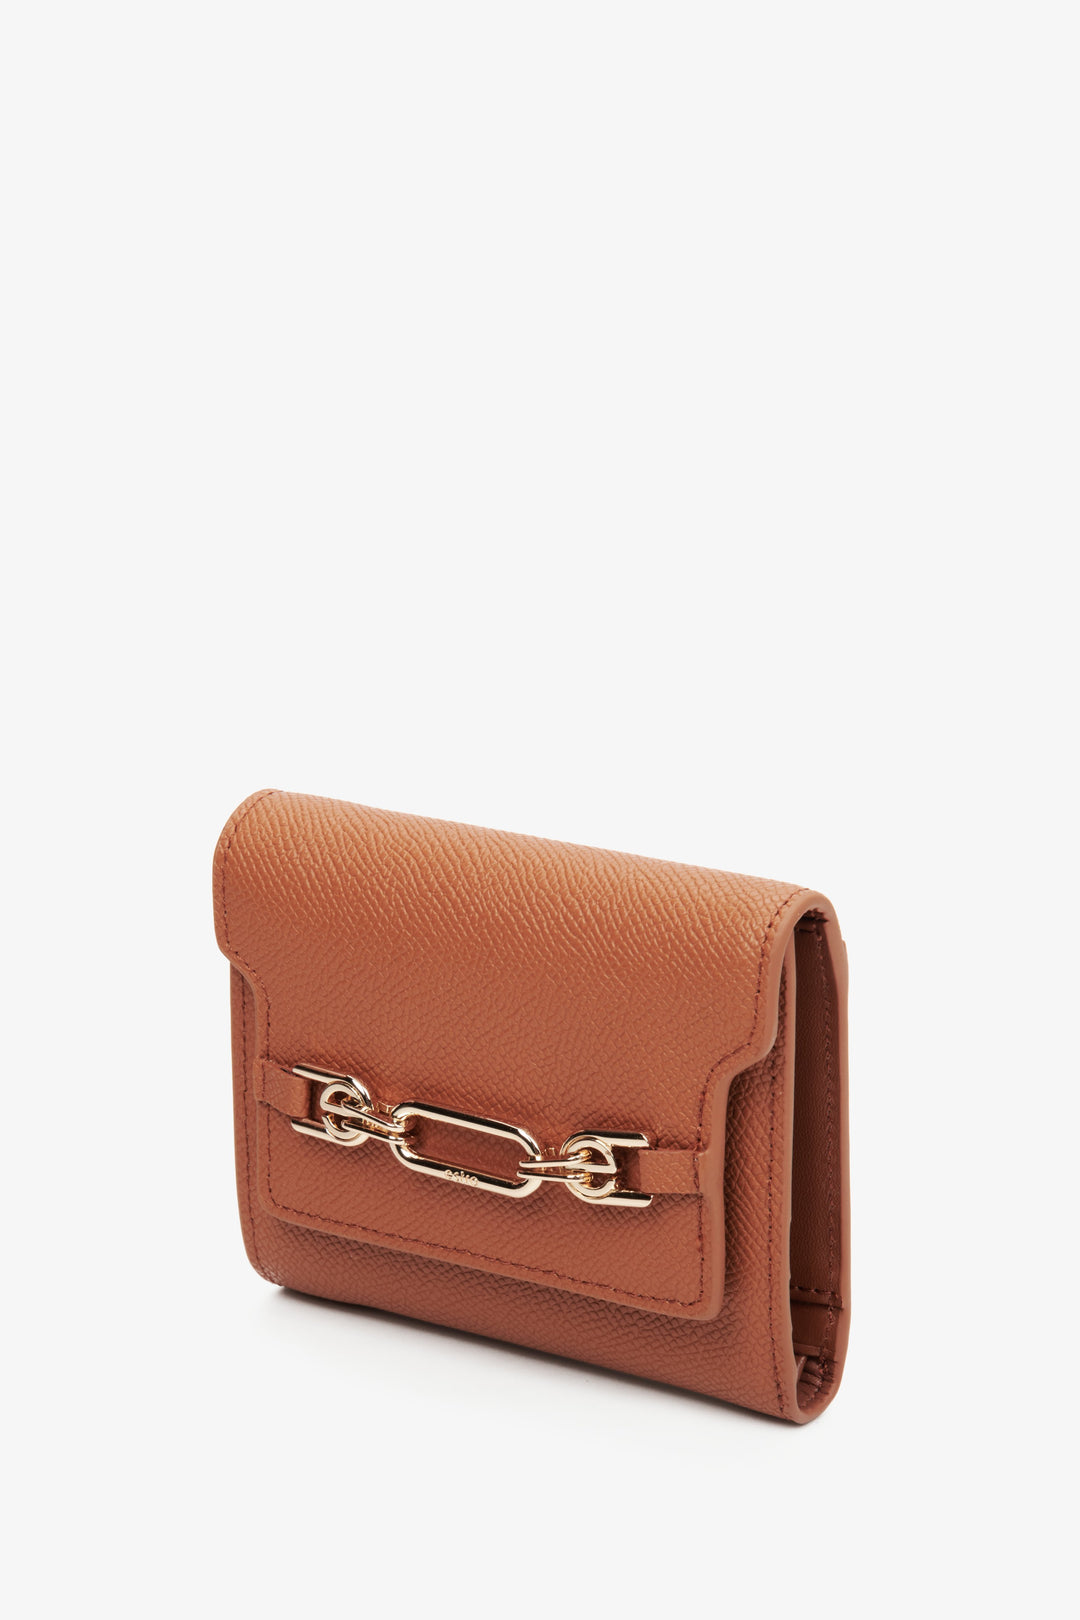 Women's brown leather wallet with a gold clasp, Estro.